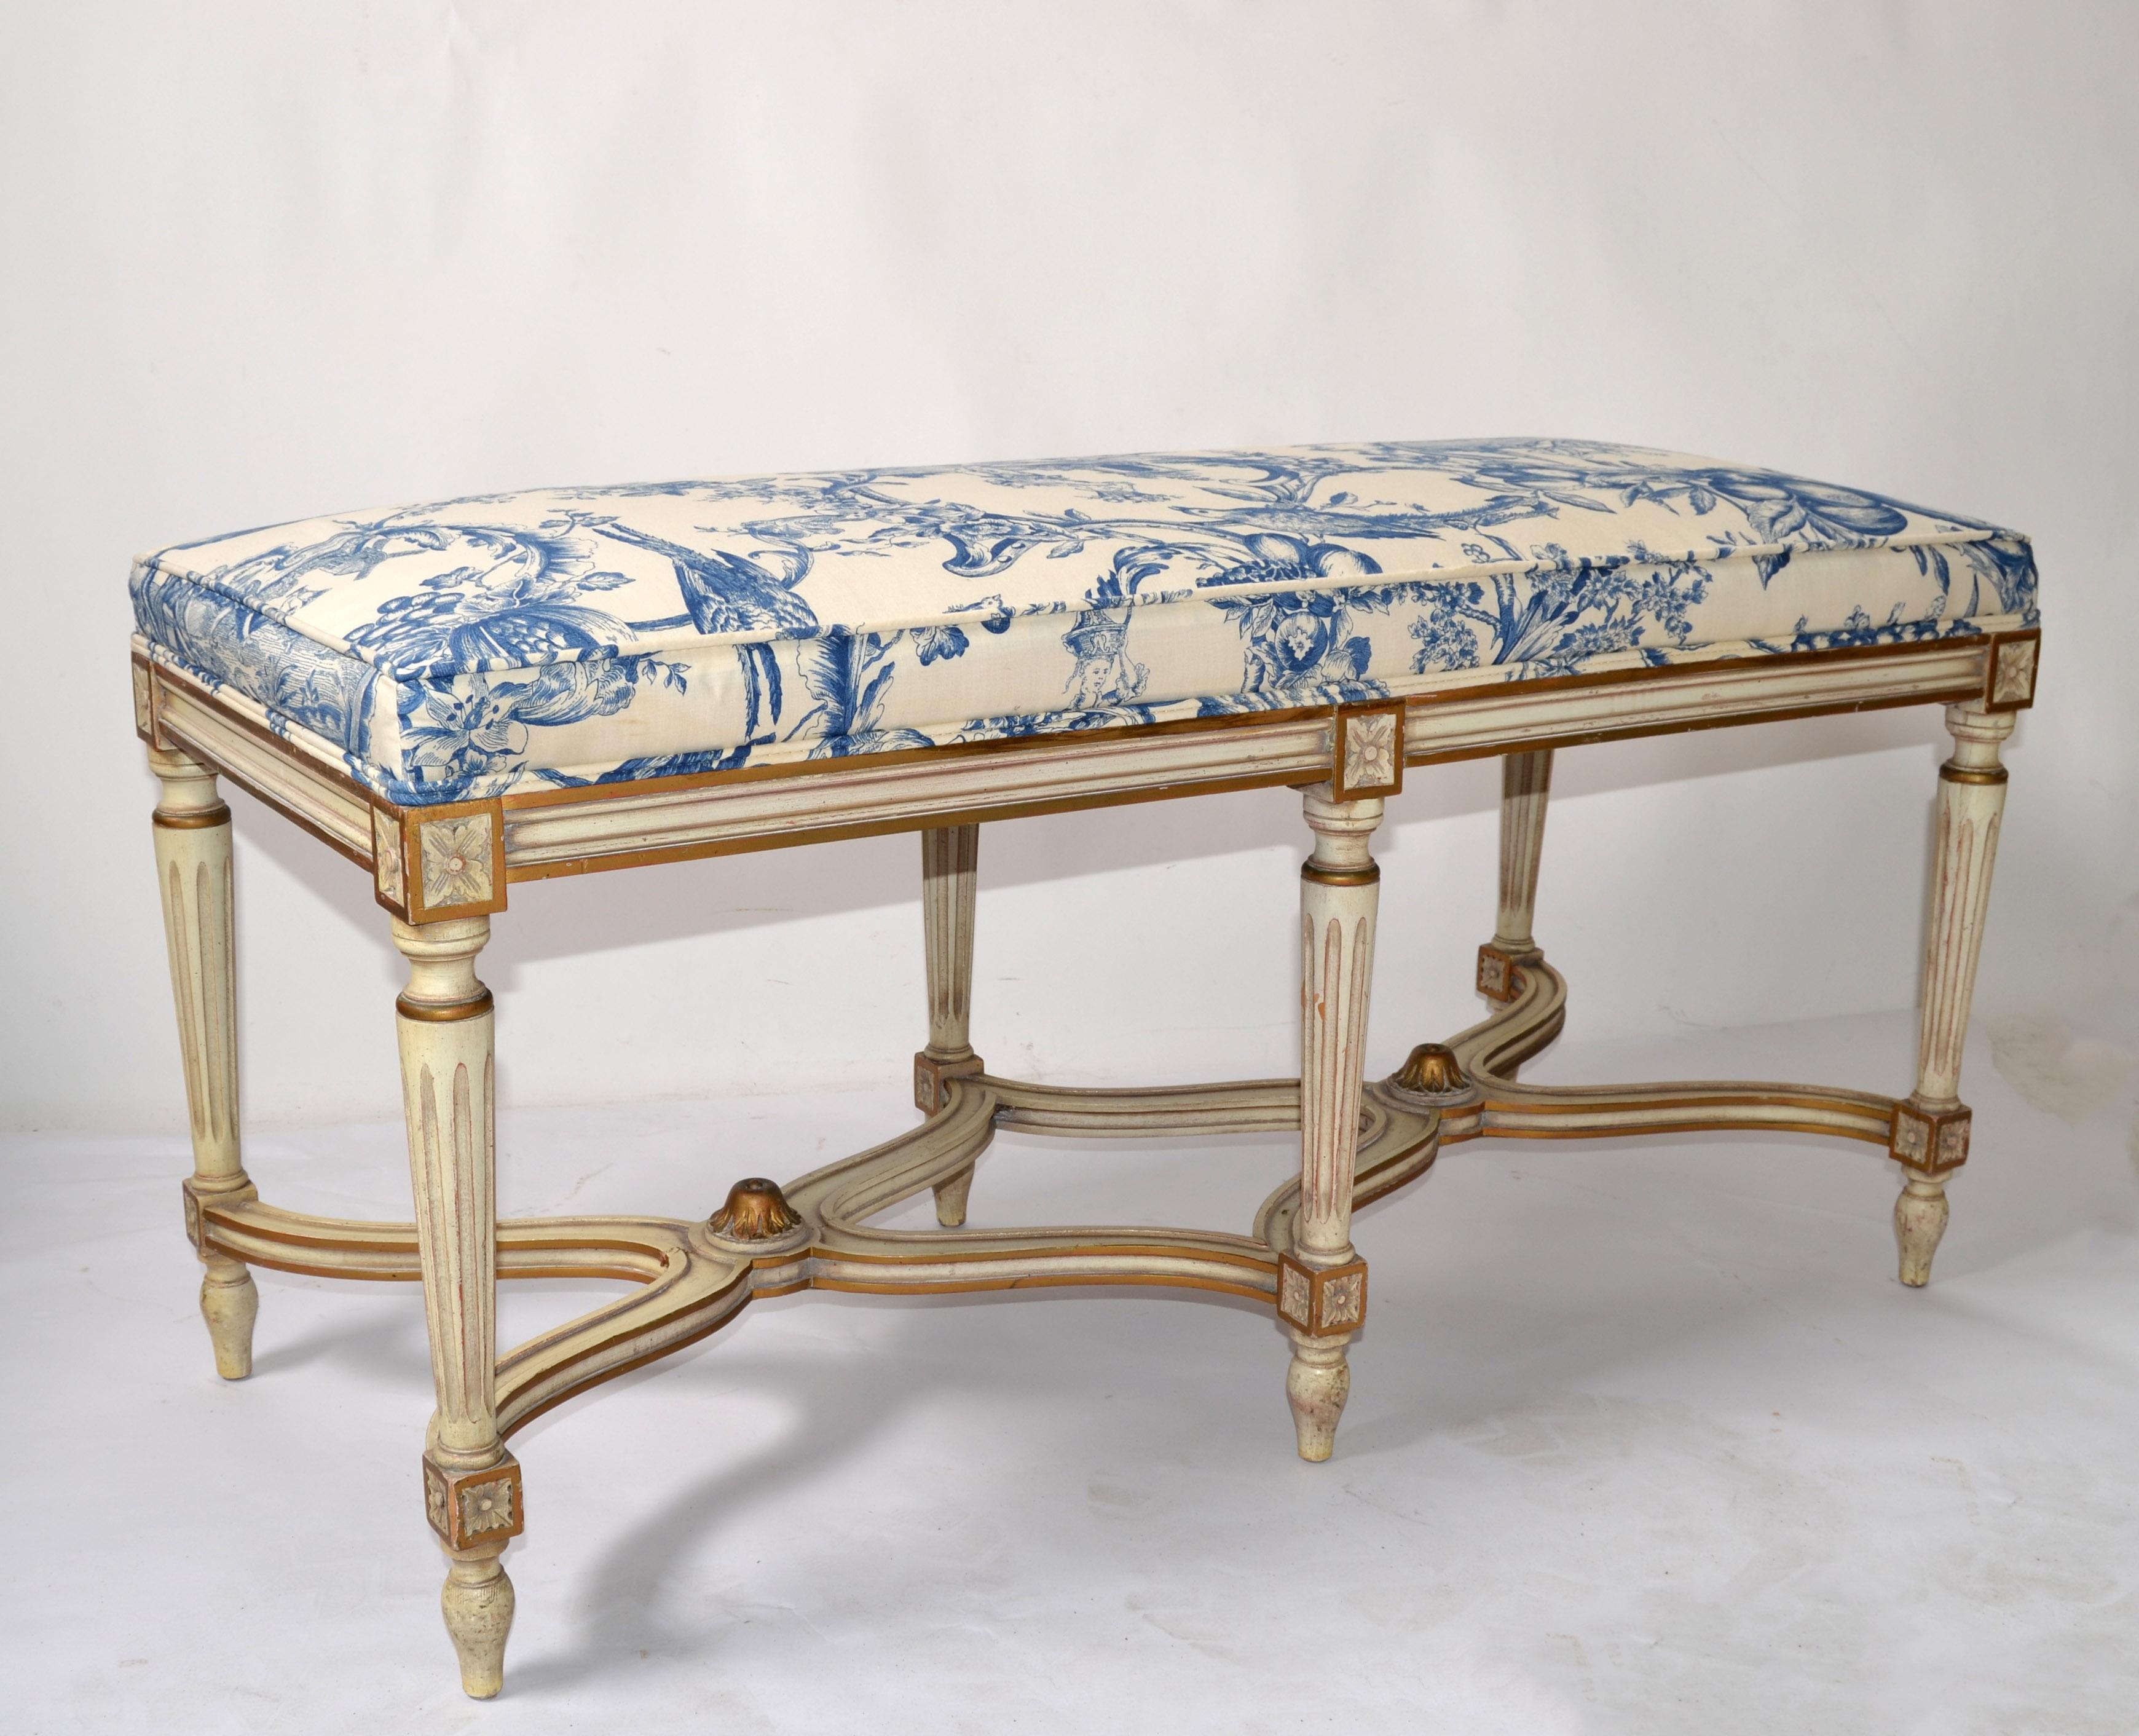 Louis XVI Bench Karges Furniture Co. Hand Carved Hardwood Blue Motif Fabric In Good Condition For Sale In Miami, FL